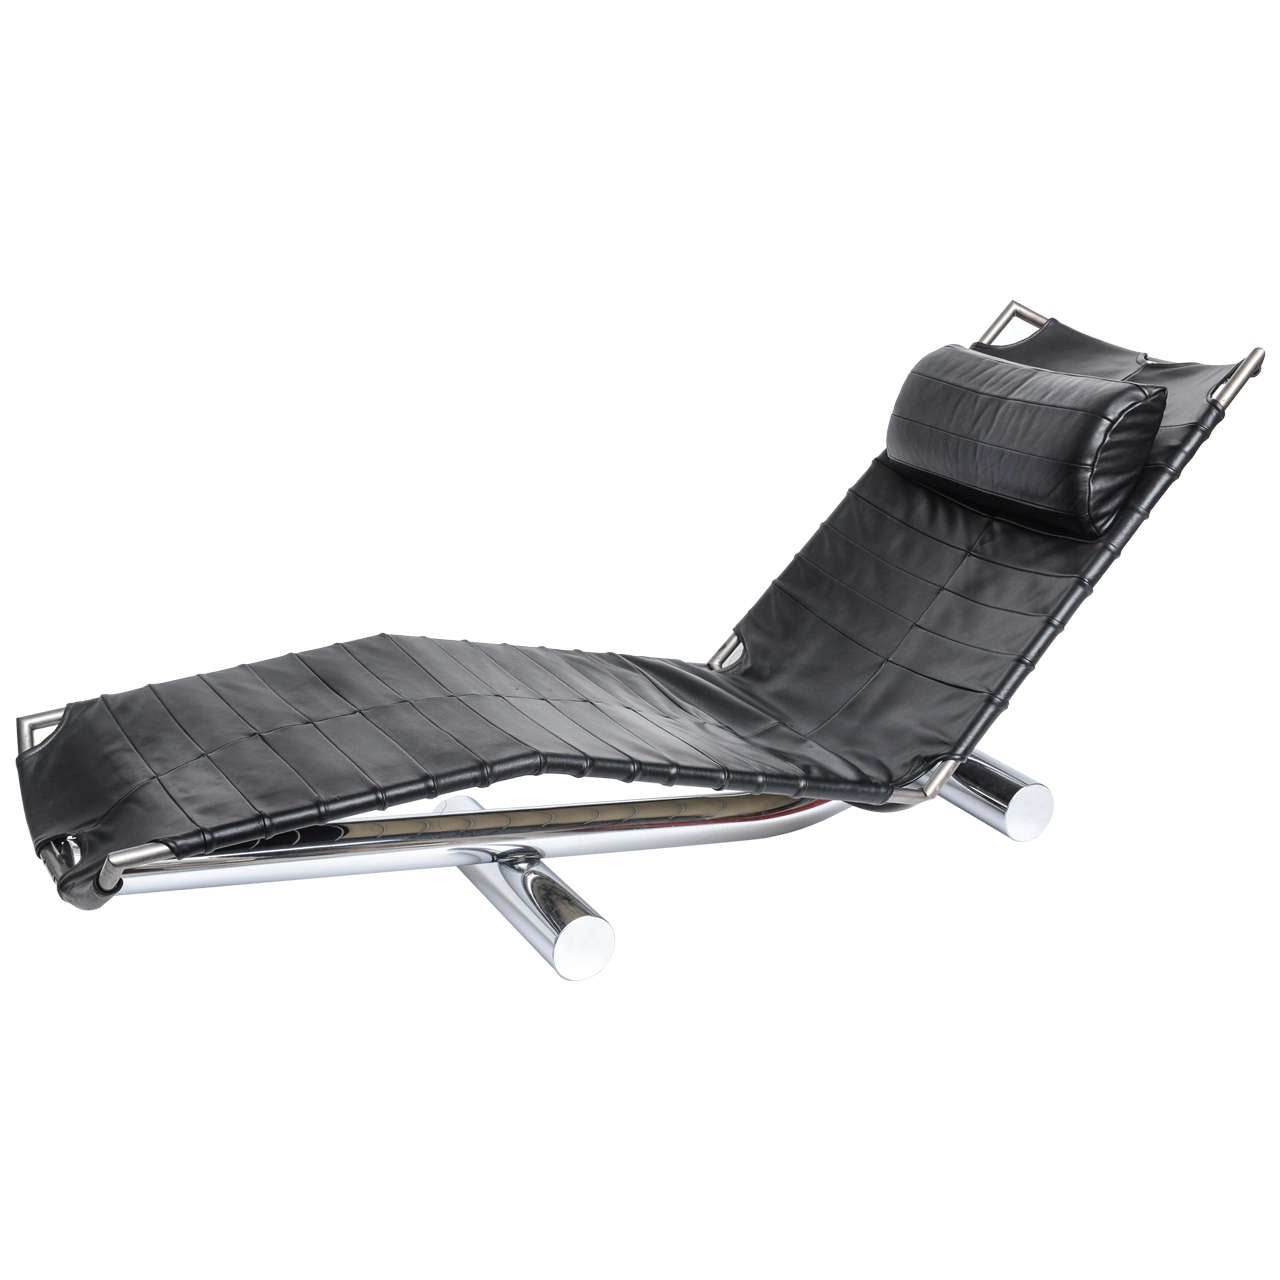 Paul Tuttle Chariot Chaise Lounge 